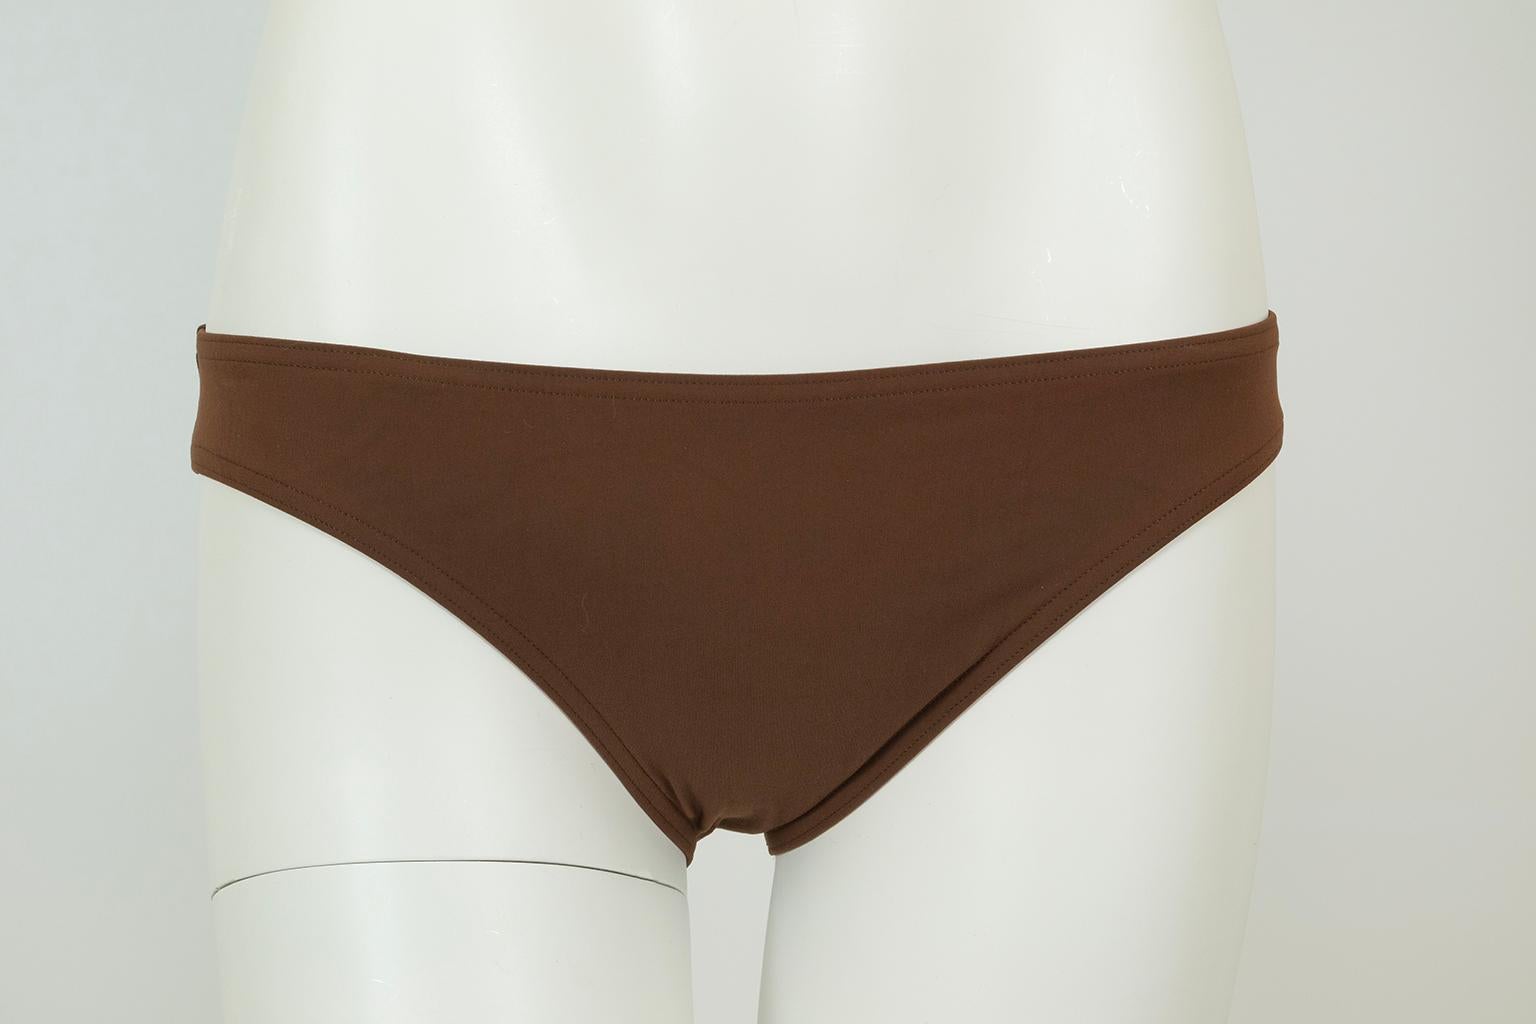 Michael Kors Collection Brown Shirred Bustier Pinup Tankini Swimsuit – XS, 2006 For Sale 6